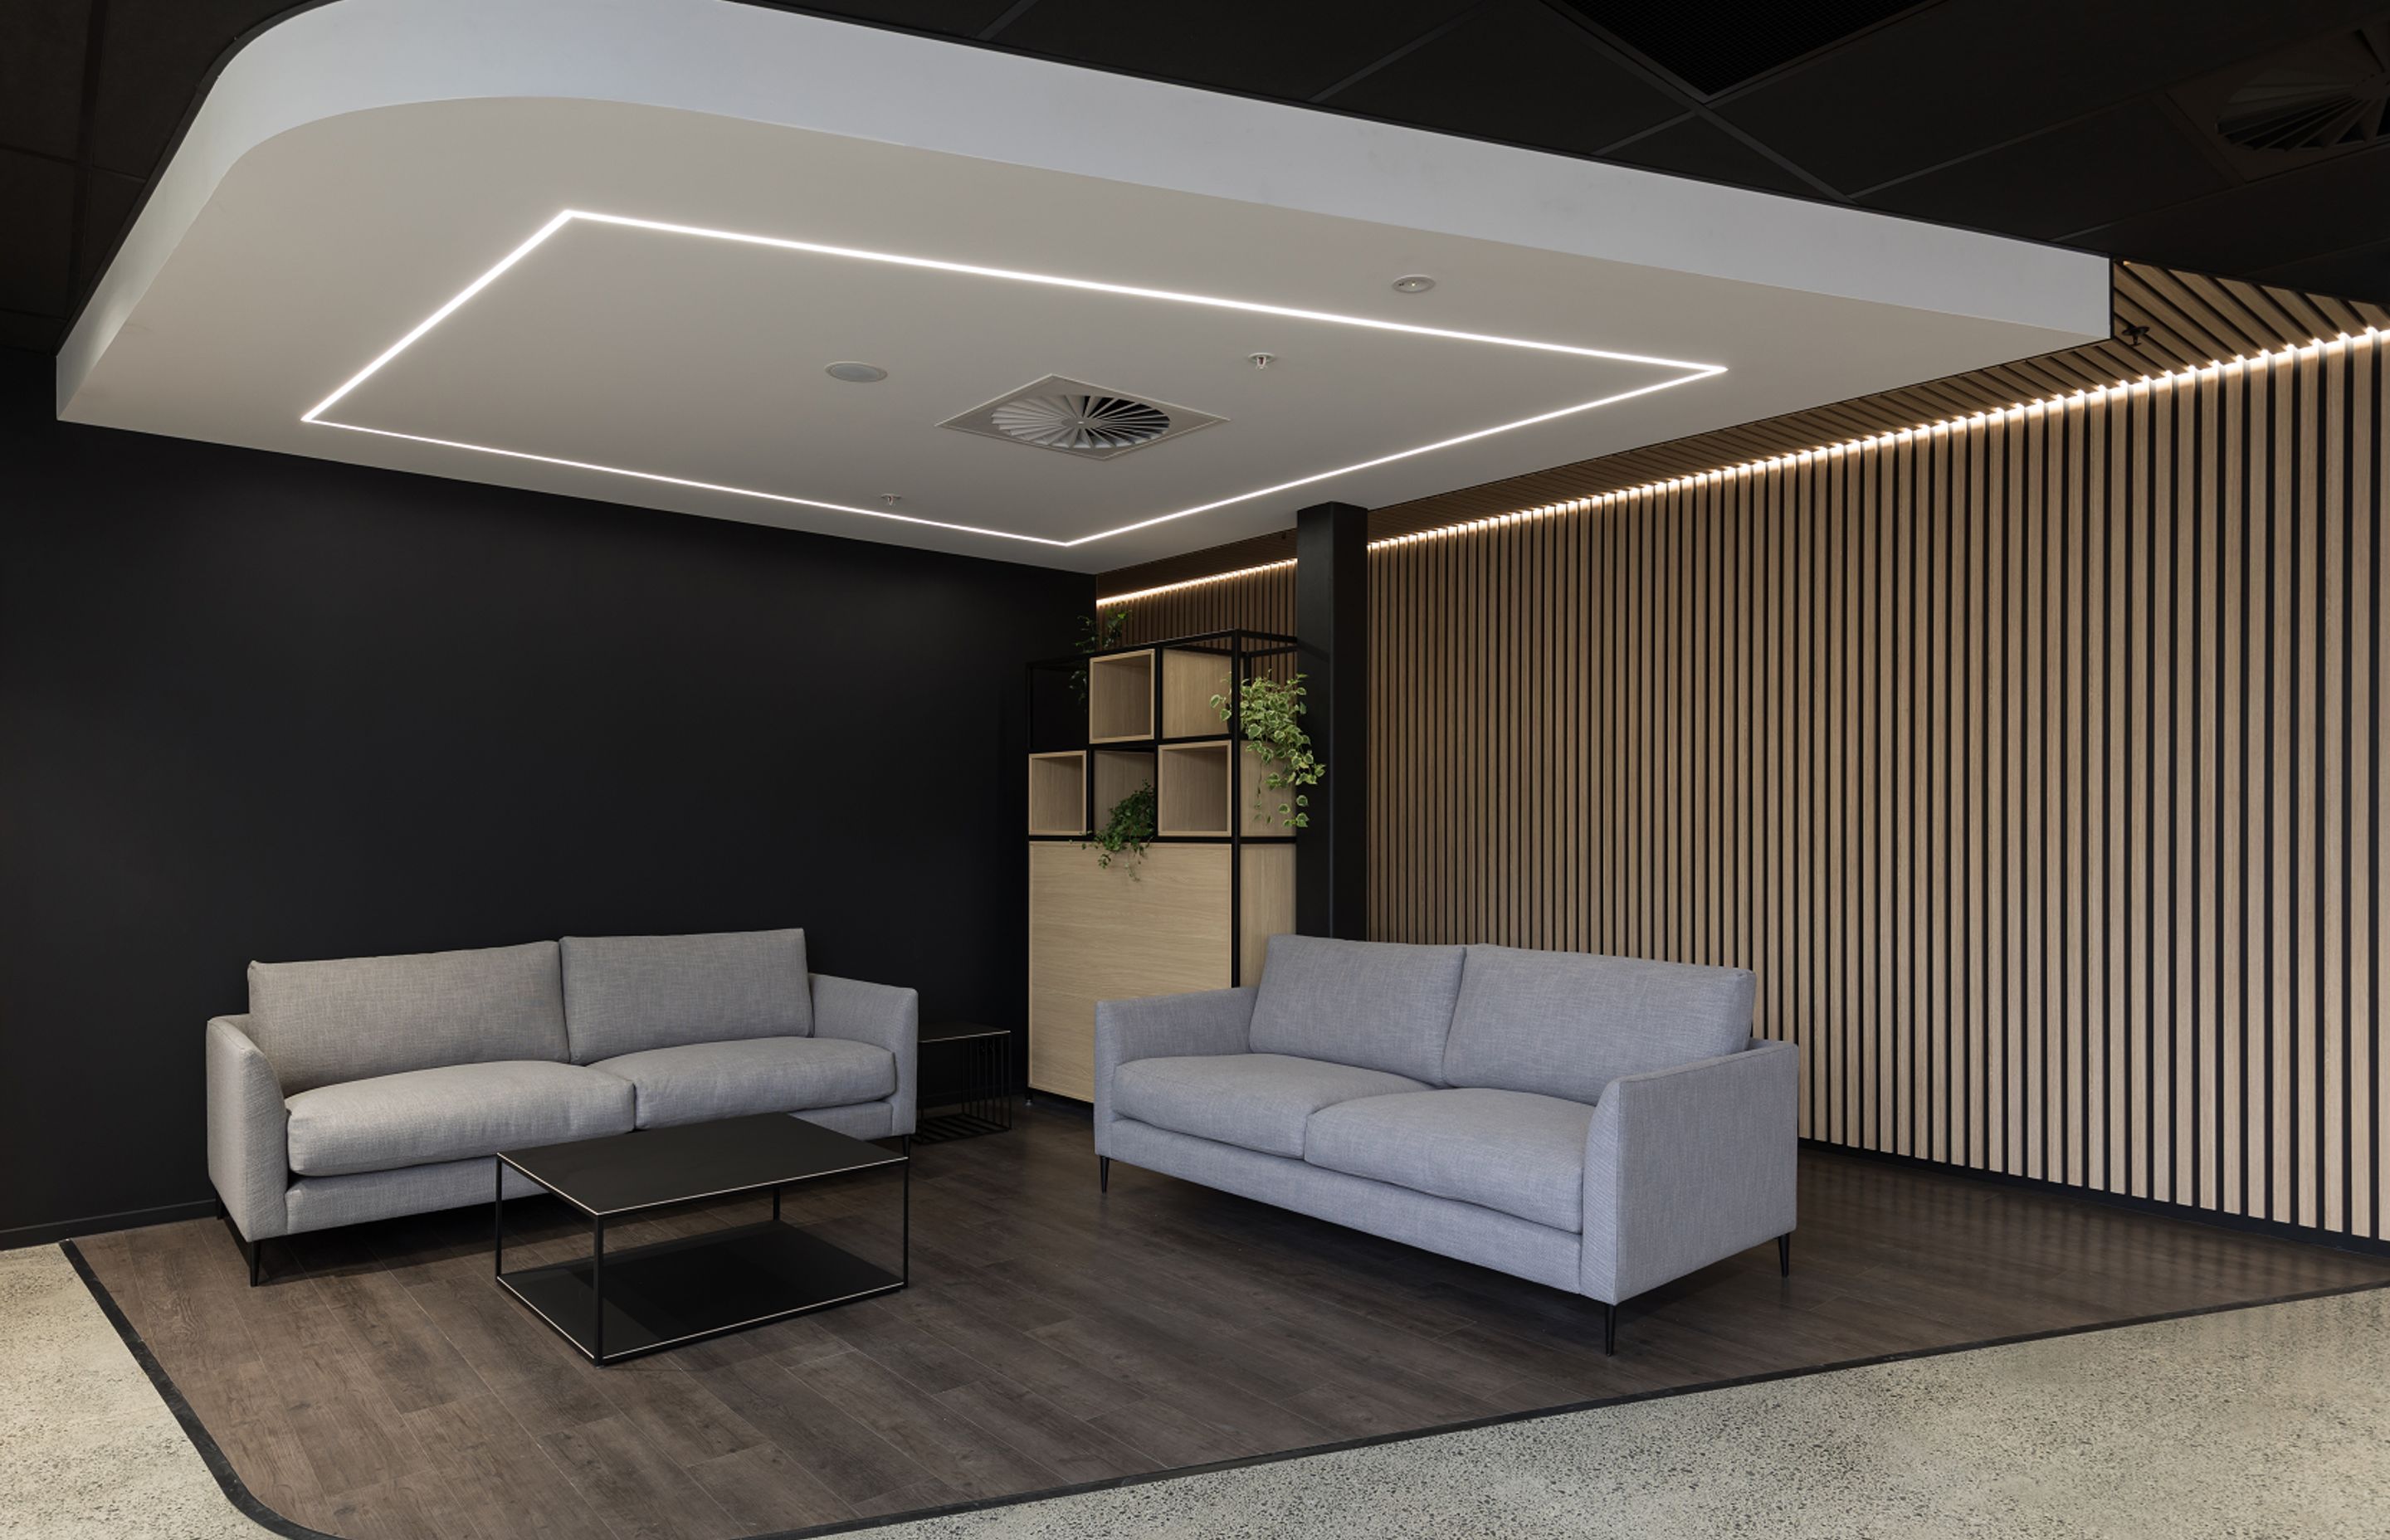 Recessed linear lighting adds drama